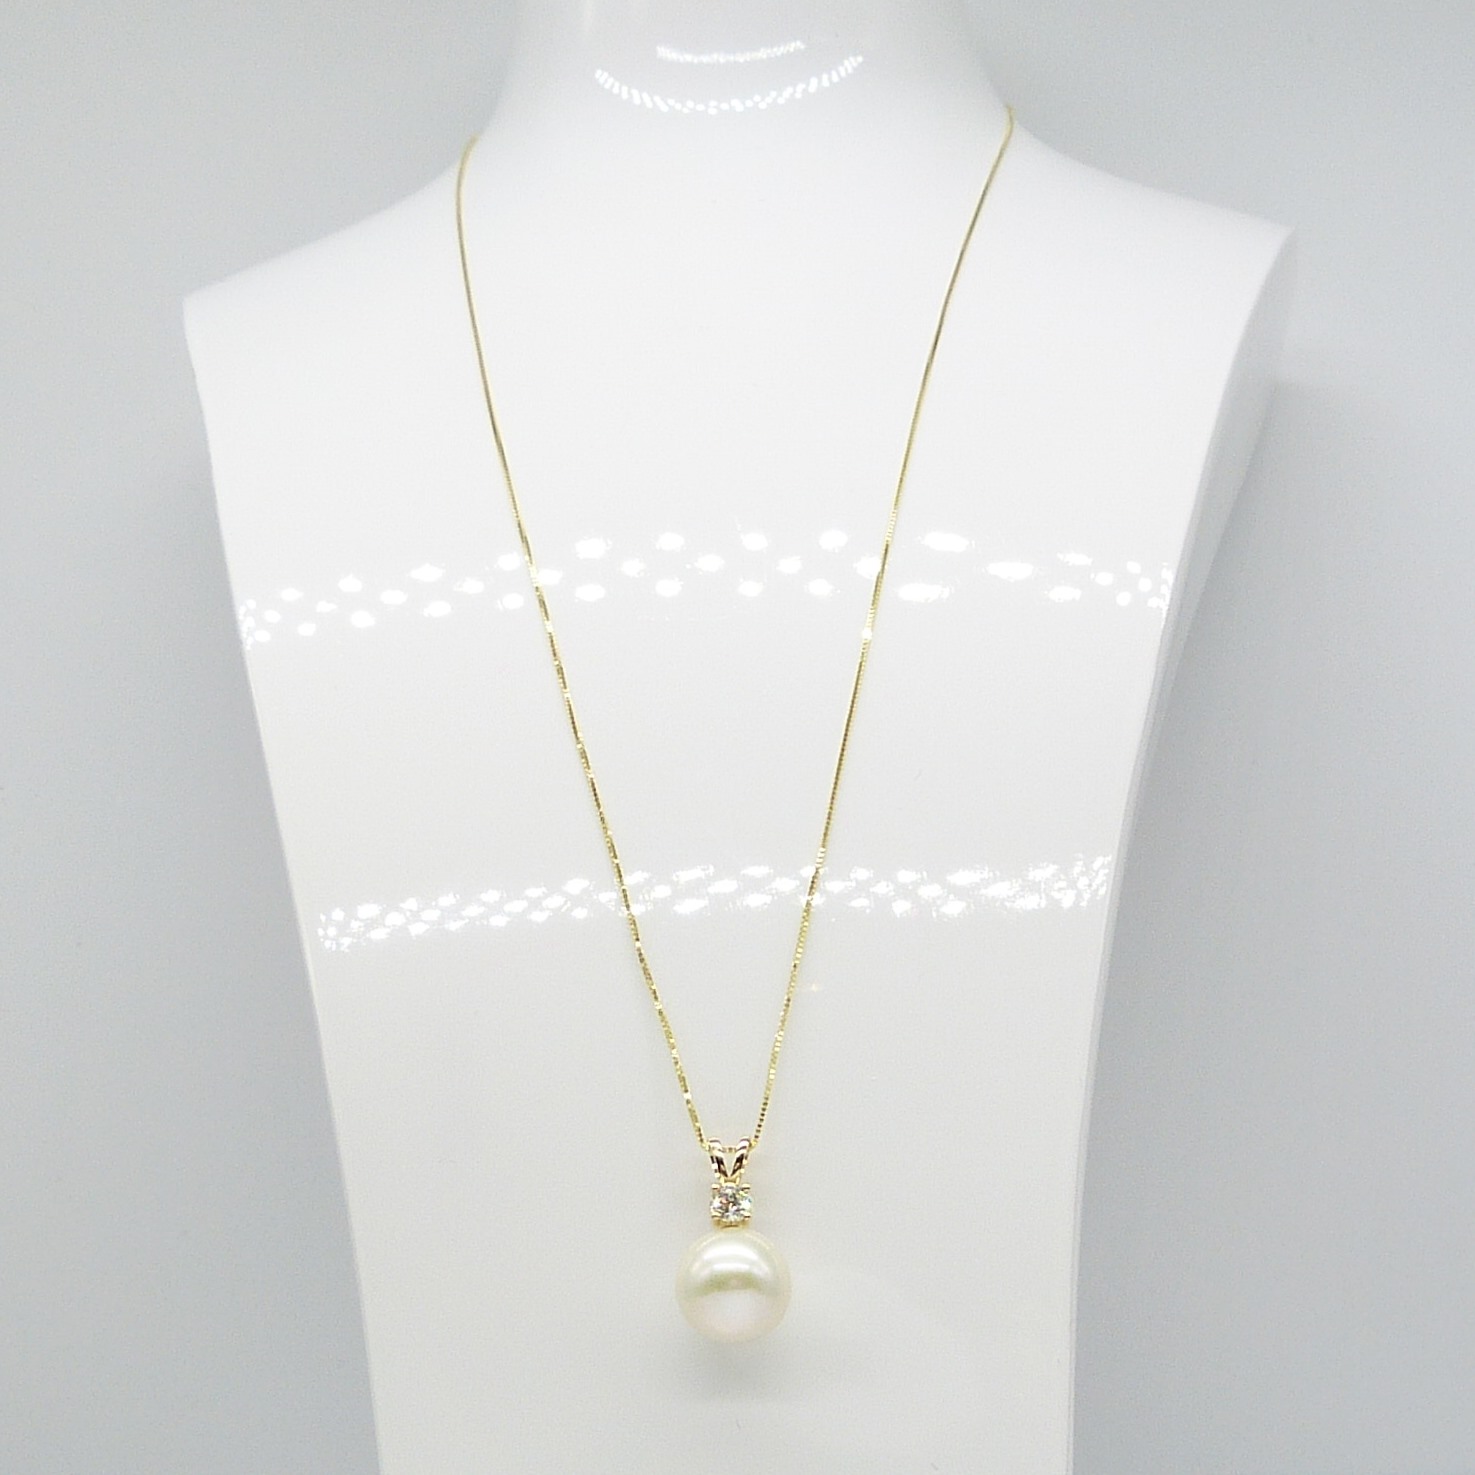 Yellow gold round freshwater pearl and 0.23 carat diamond necklace - Image 4 of 6